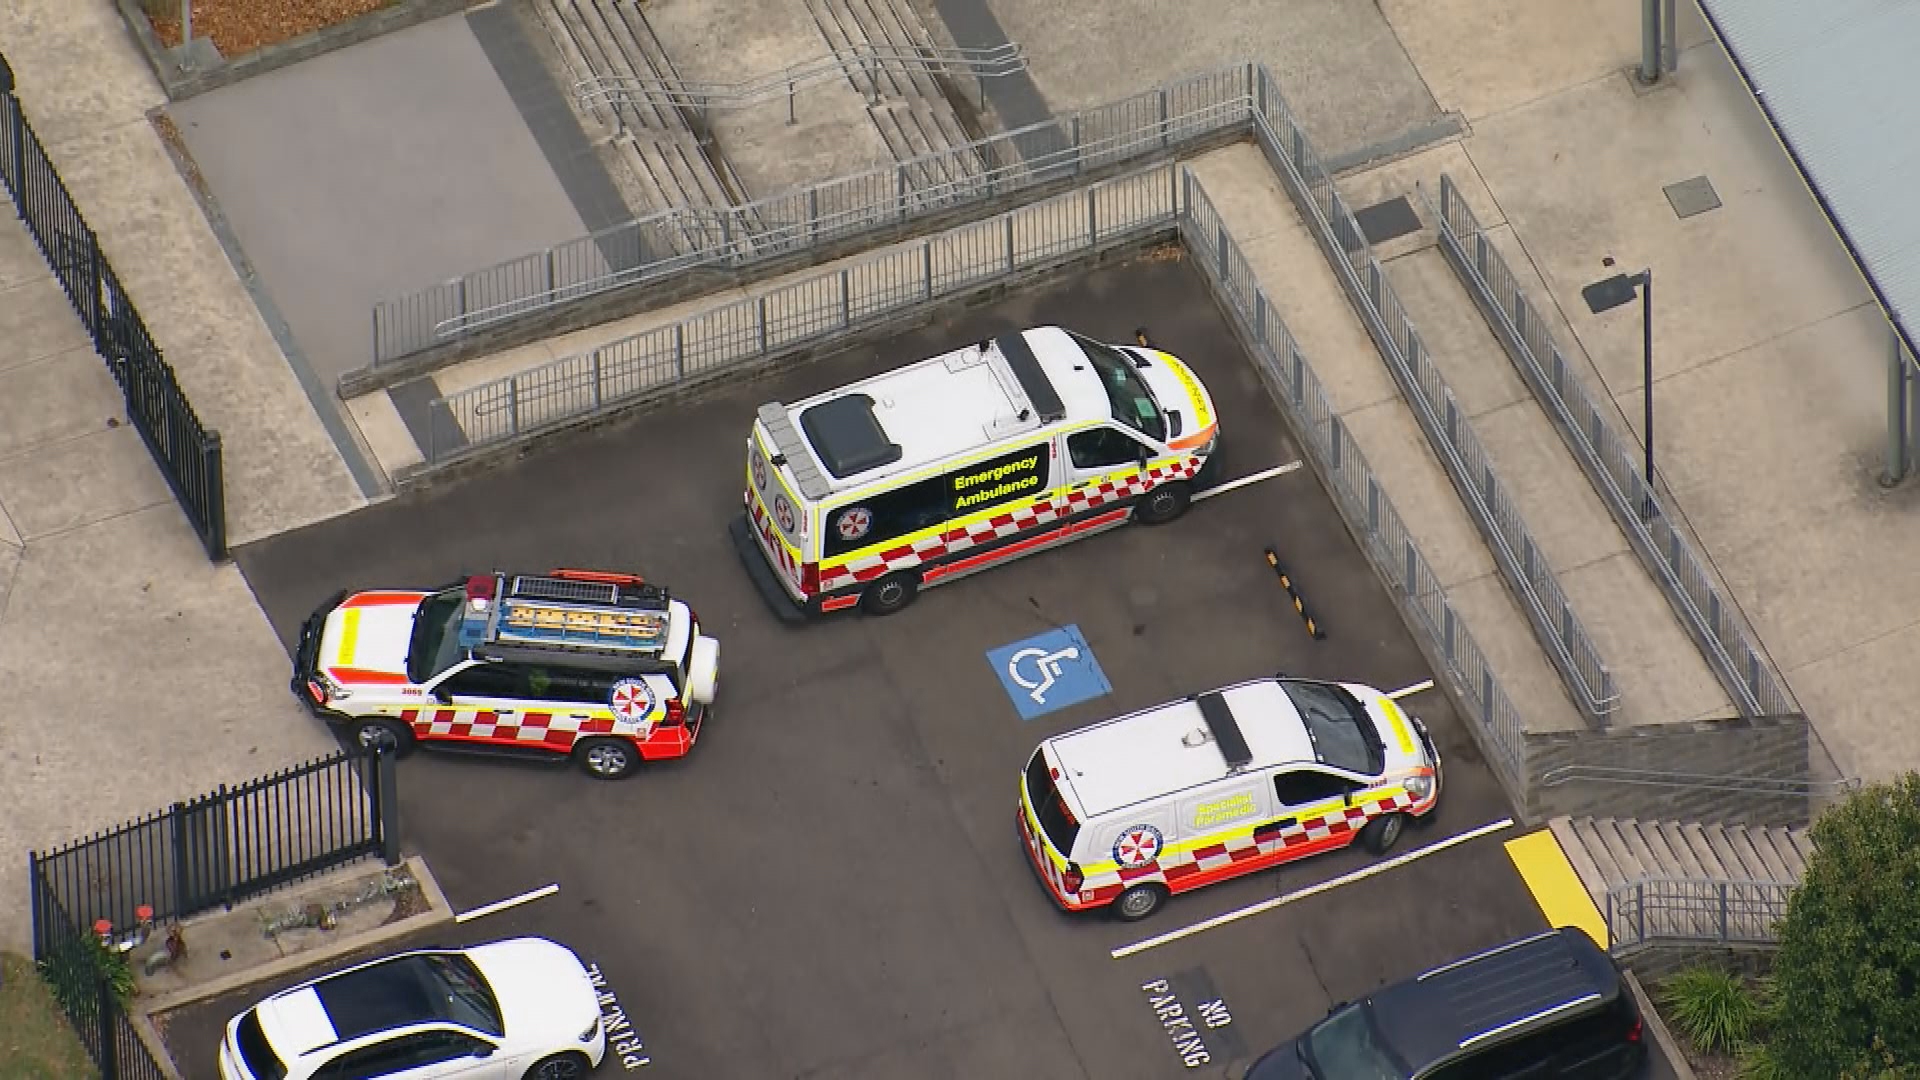 almost 30 students, teachers left feeling 'unwell' after chemical spill at school